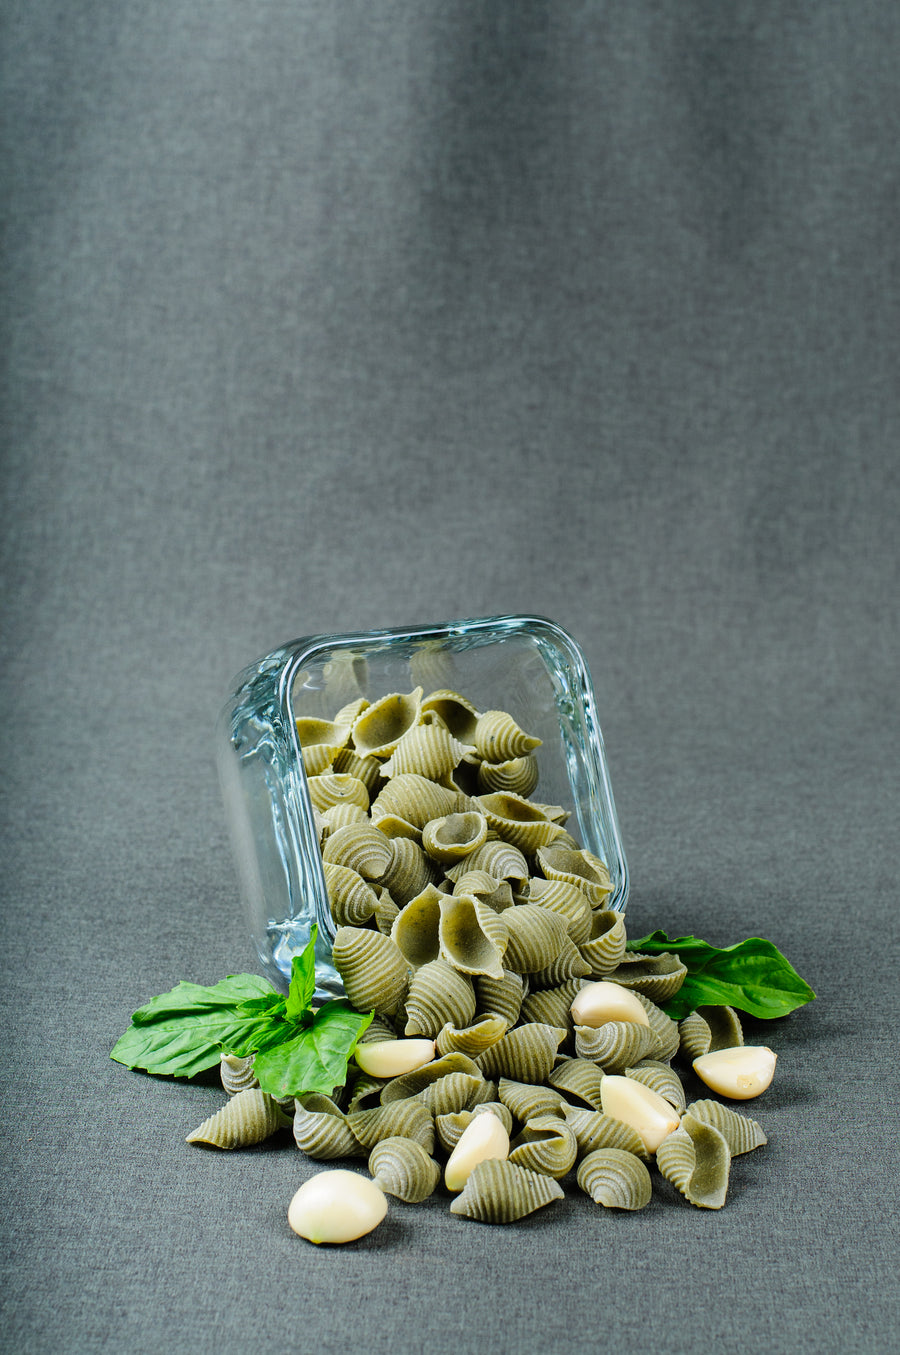 Dry Pasta Shapes - Pappardelle's Pasta